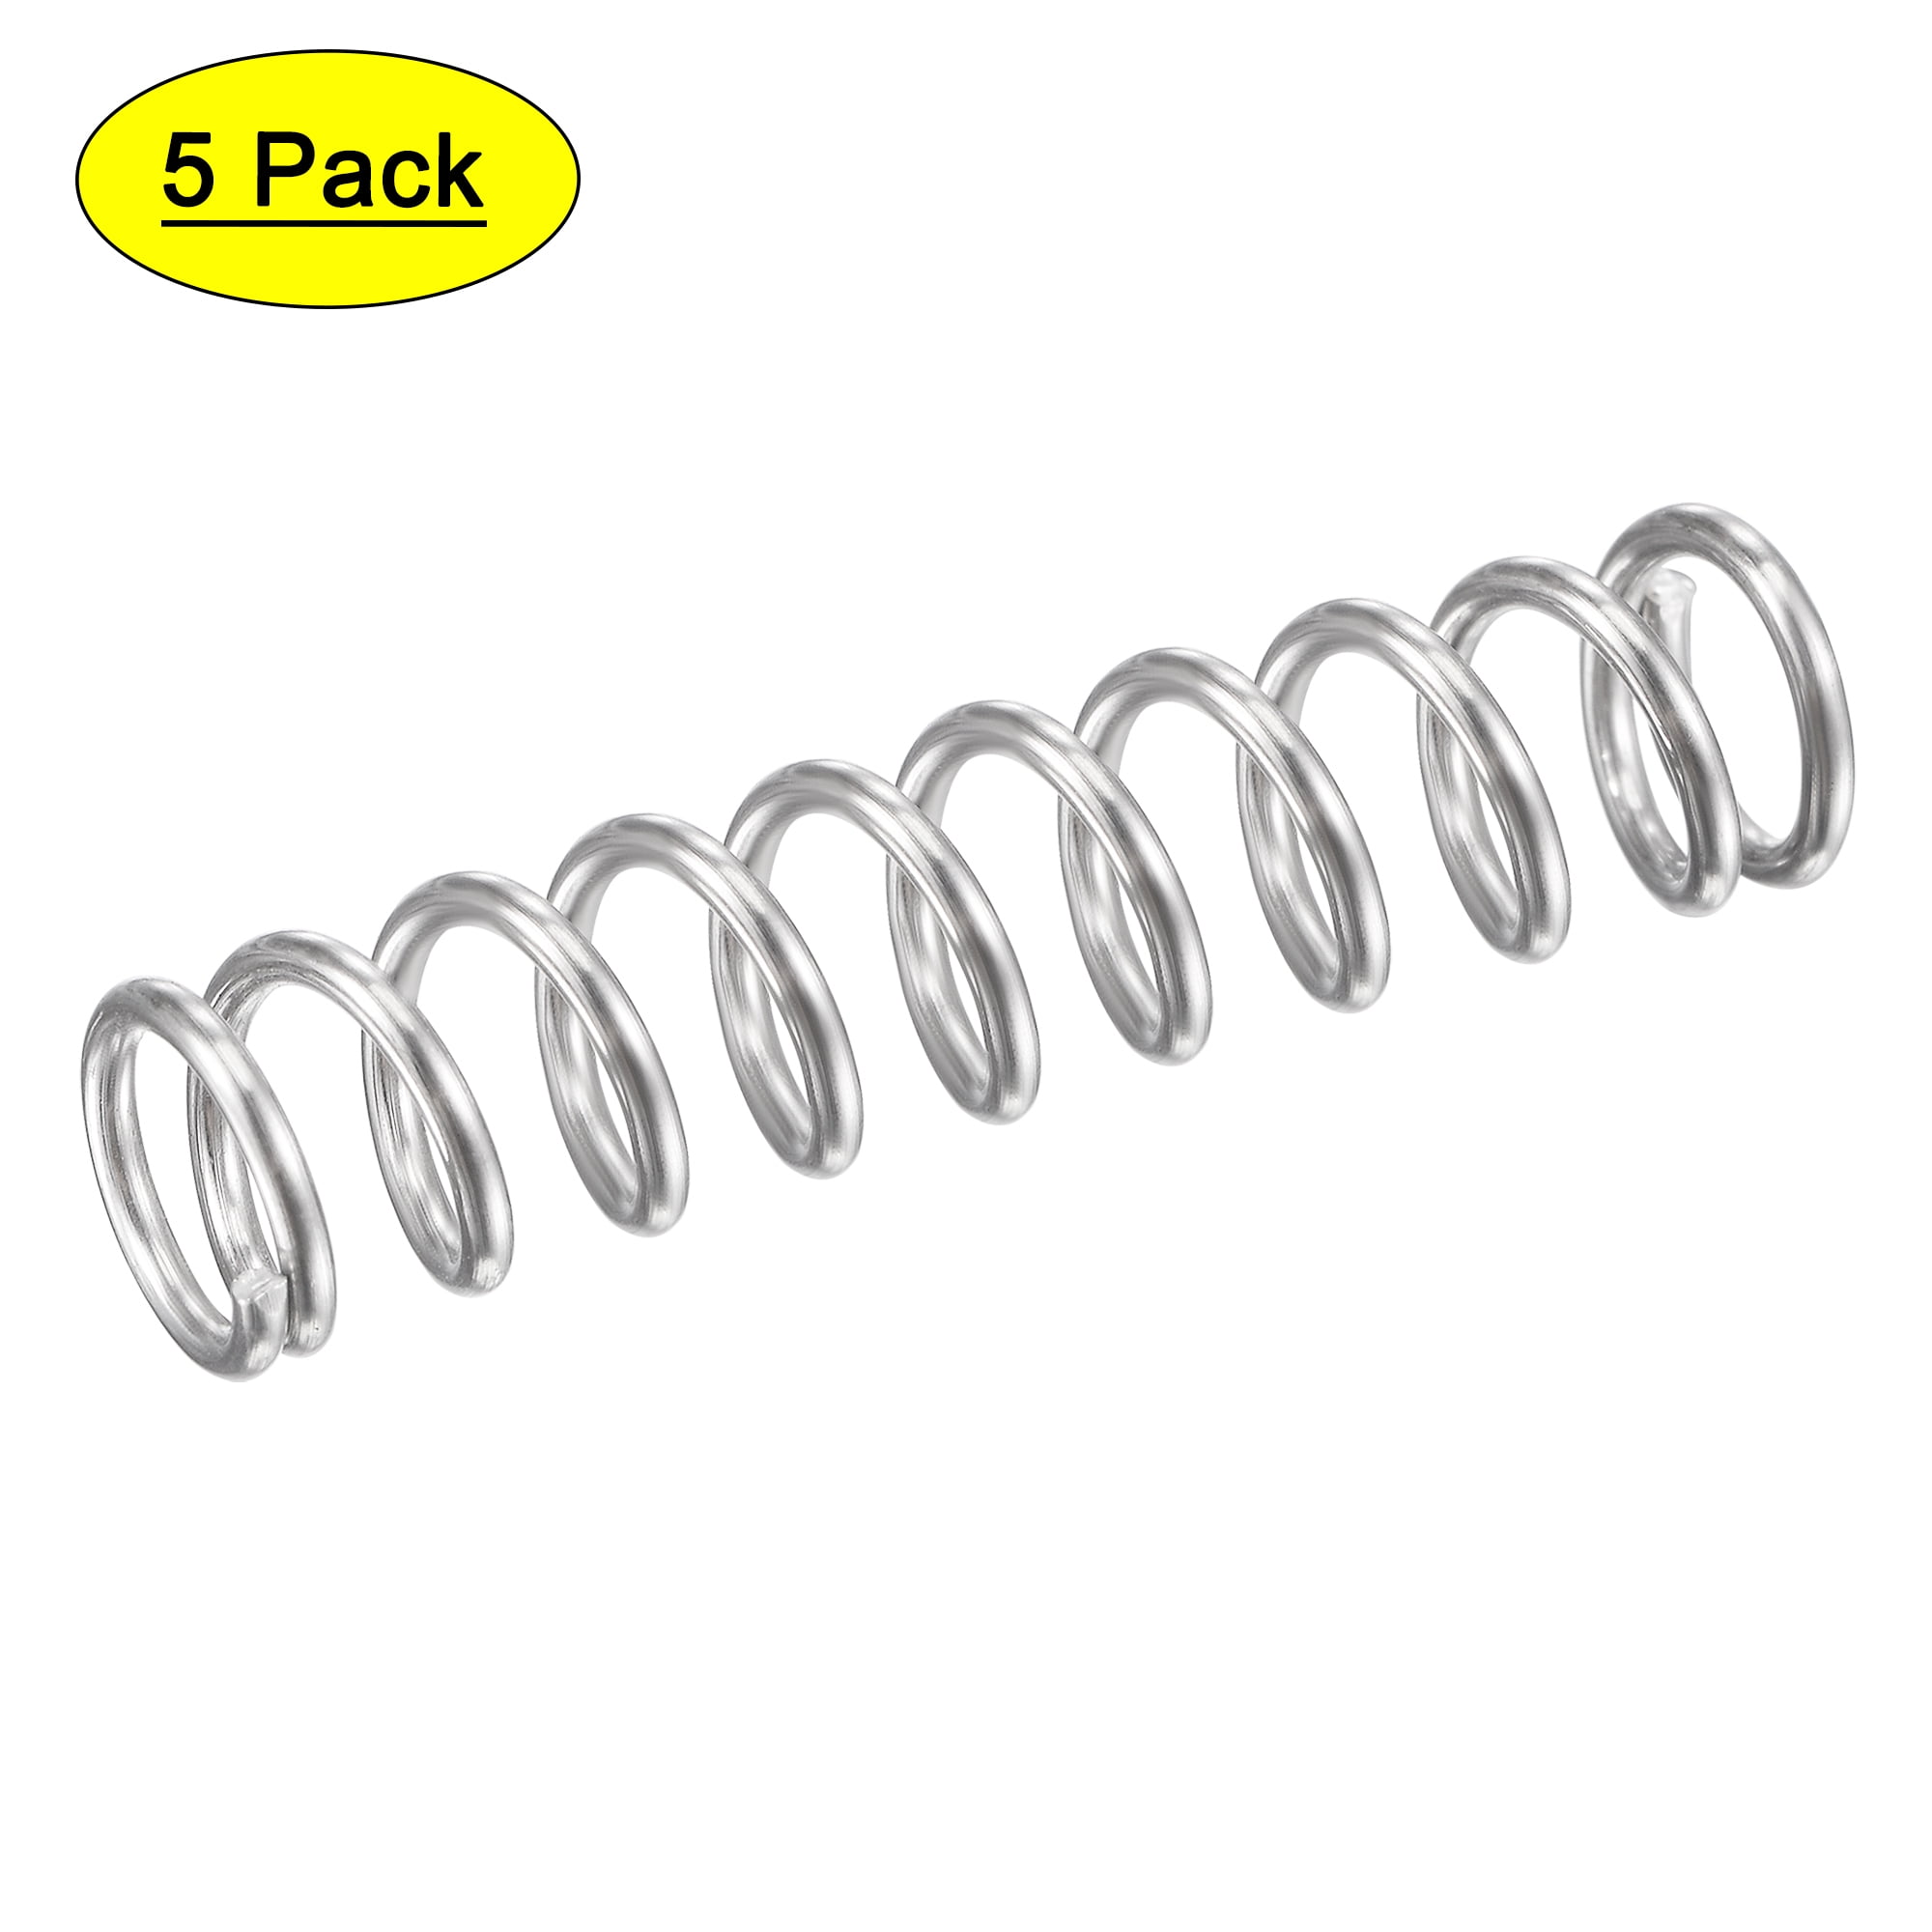 5pcs 304 Stainless Steel Compression Spring